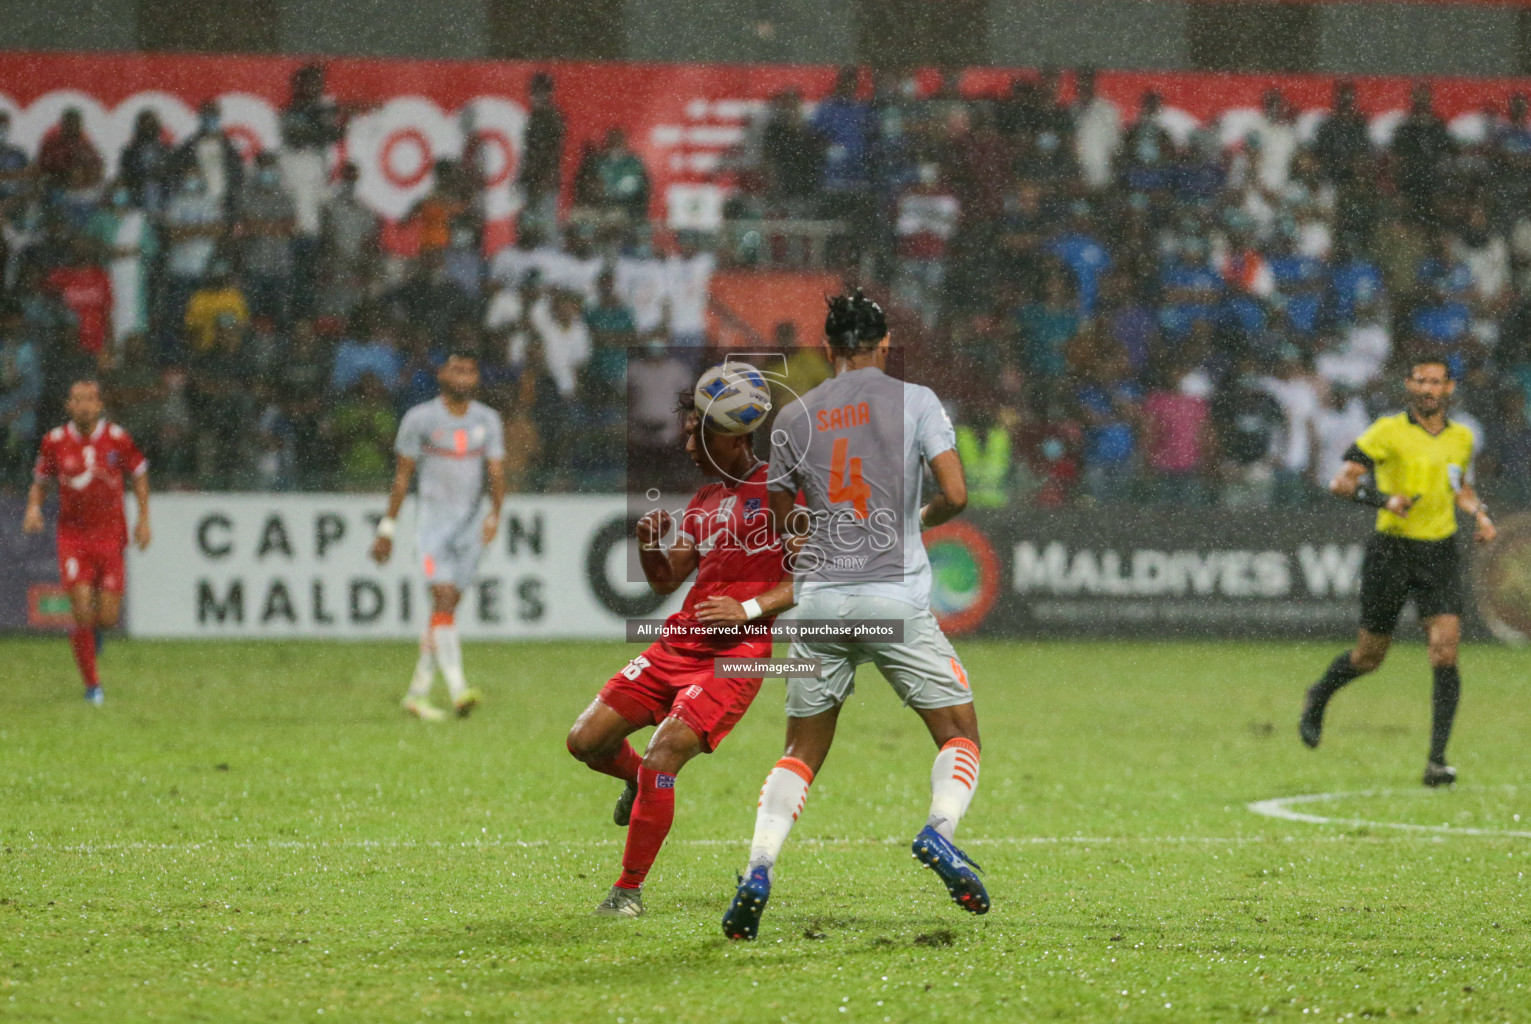 India vs Nepal in SAFF Championship 2021 Finals held on 16th October 2021 in Galolhu National Stadium, Male', Maldives